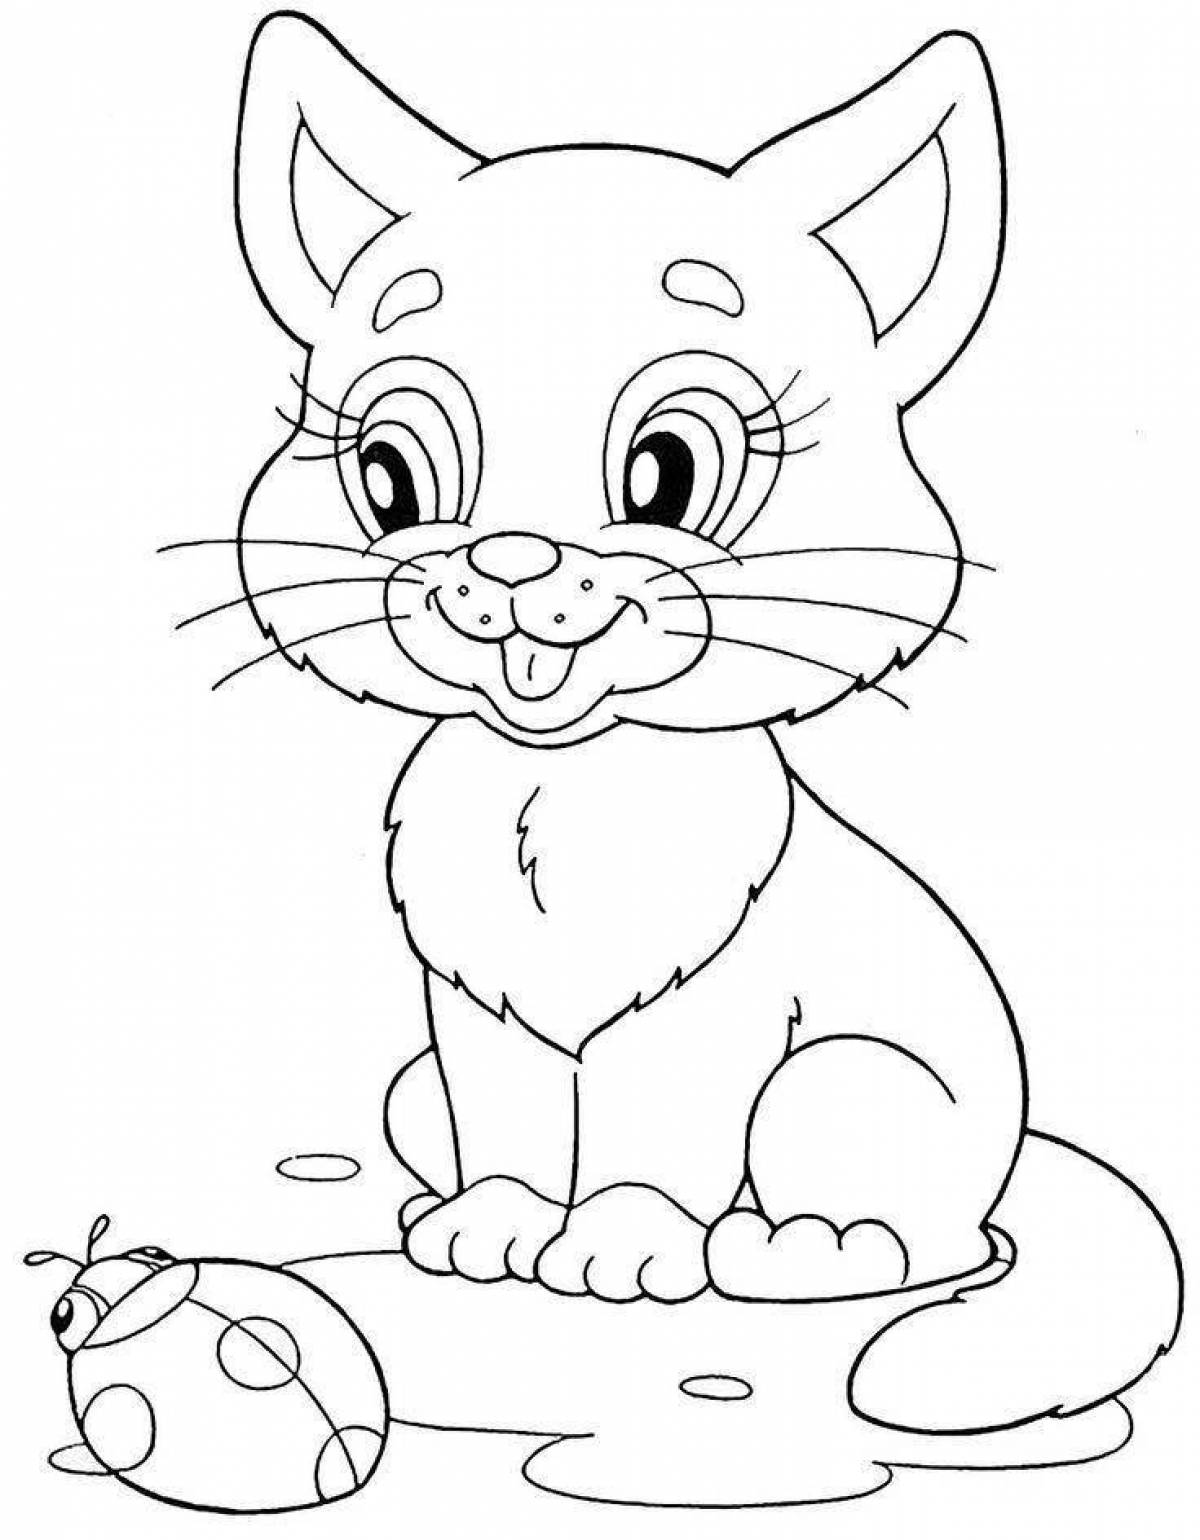 Cute animal coloring pages for kids